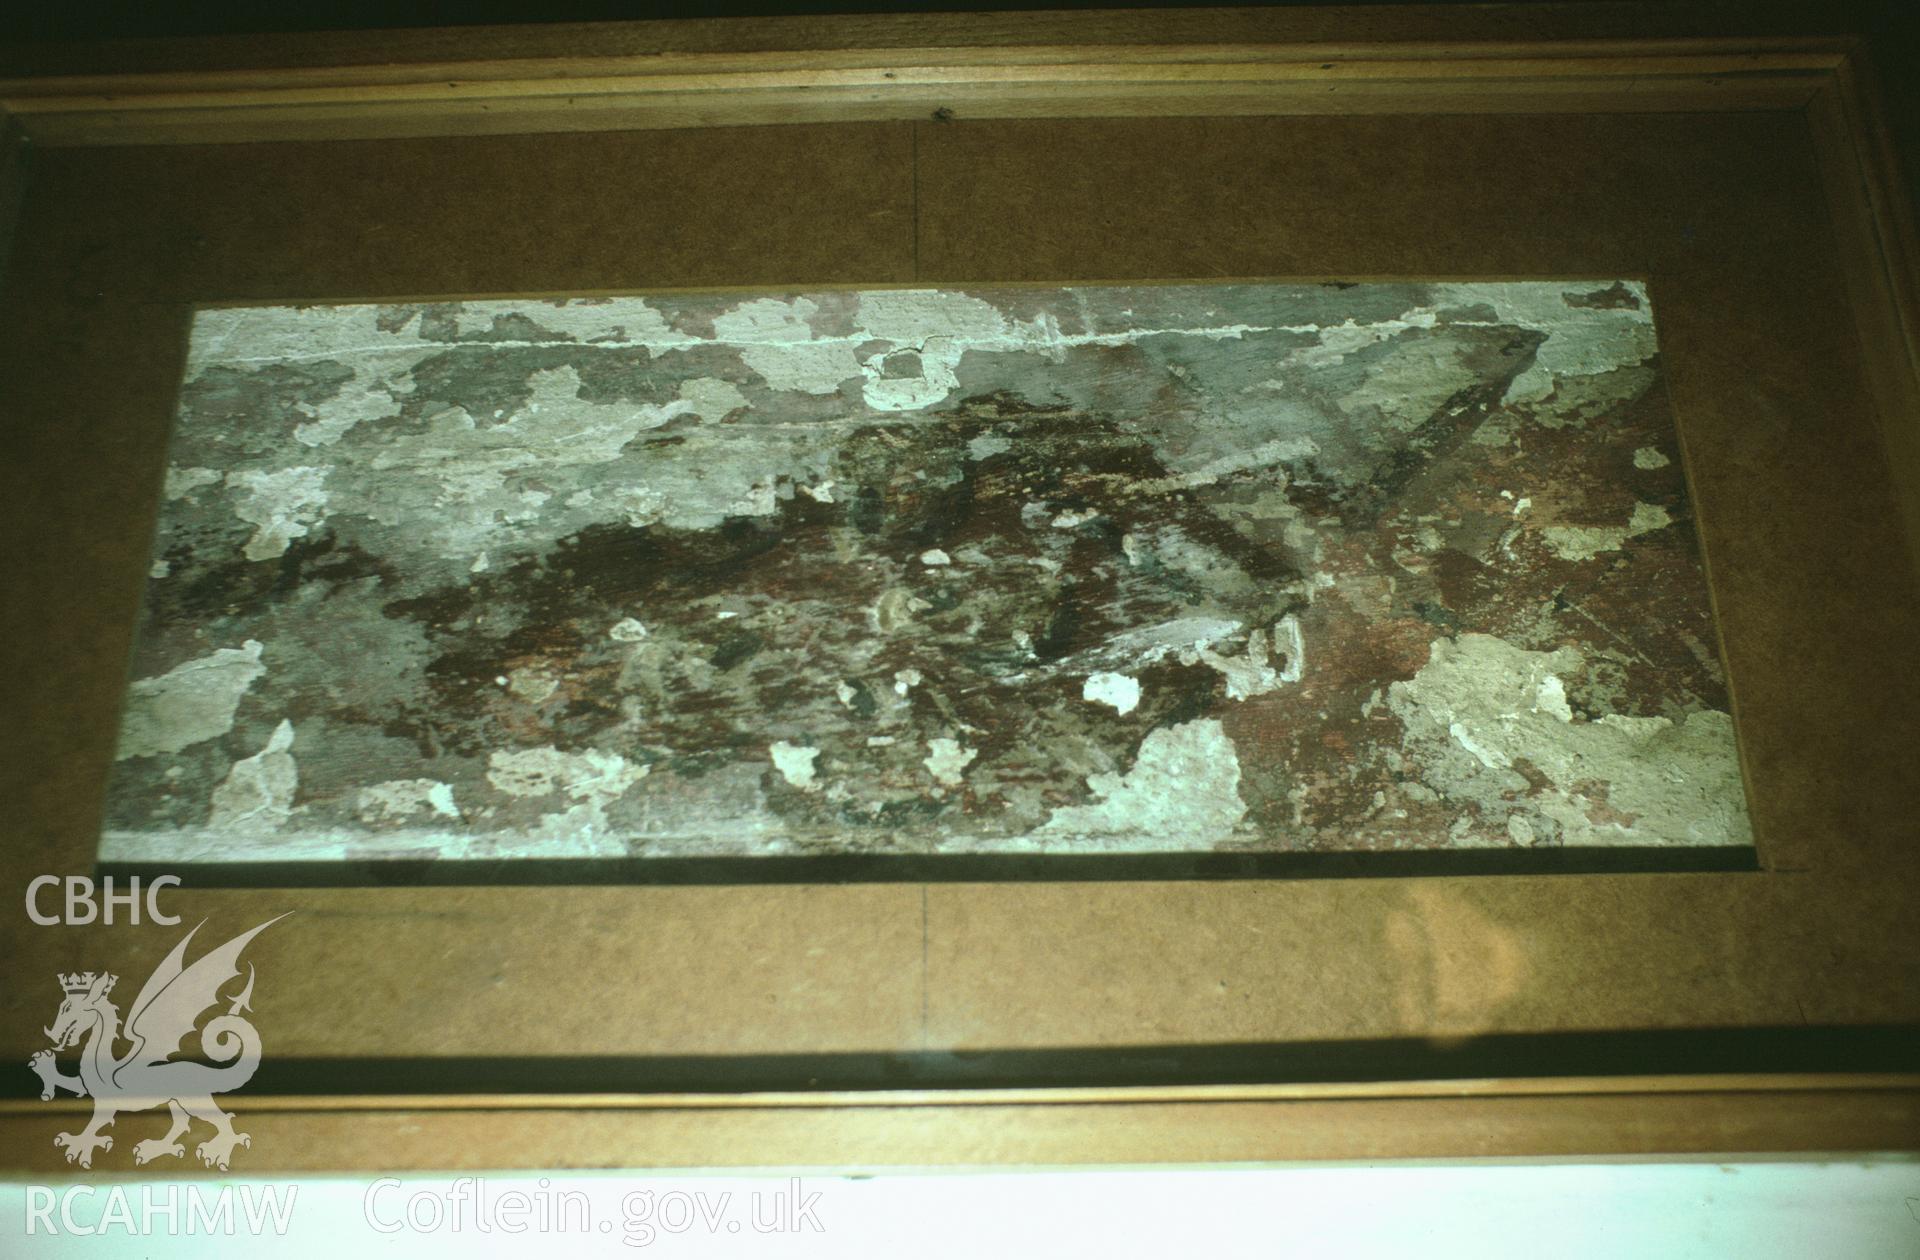 35mm colour slide showing a wall painting at 71 Eastgate, Cowbridge, Glamorgan, produced by Harry Brooksby, undated.